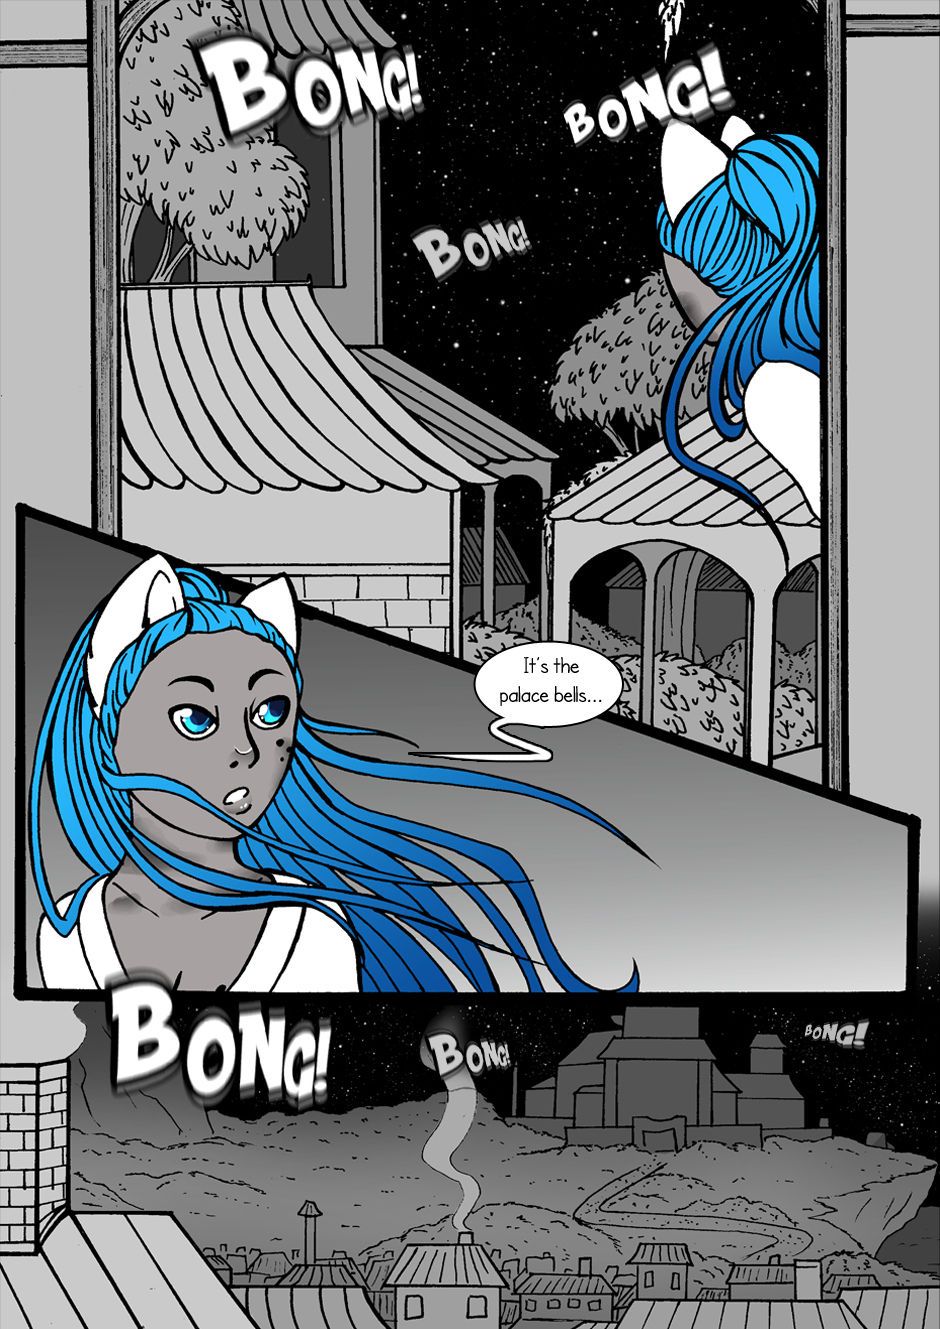 [Jeny-jen94] Between Kings and Queens [Ongoing] 11